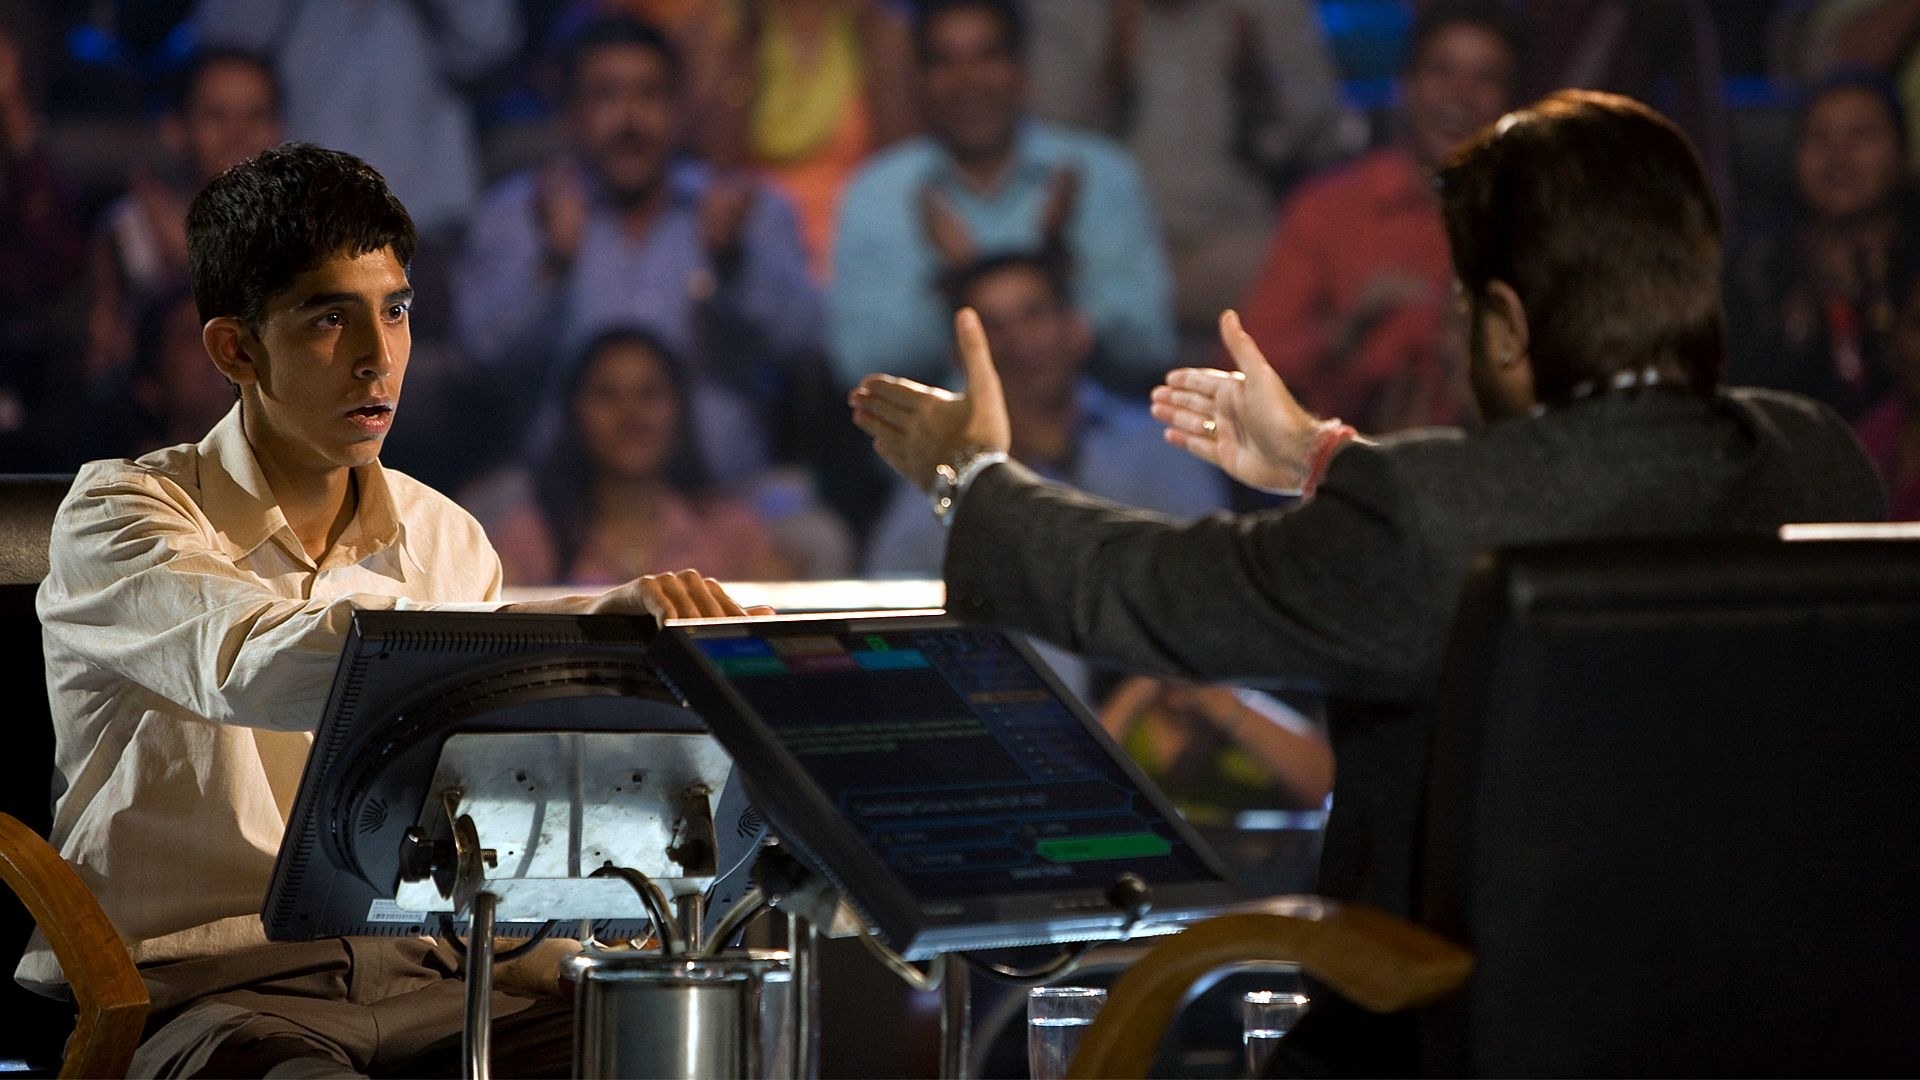 Dev Patel as Jamal Malik sitting in a game show chair as the host Prem Kumar, played by Anil Kapoor, asks him a question